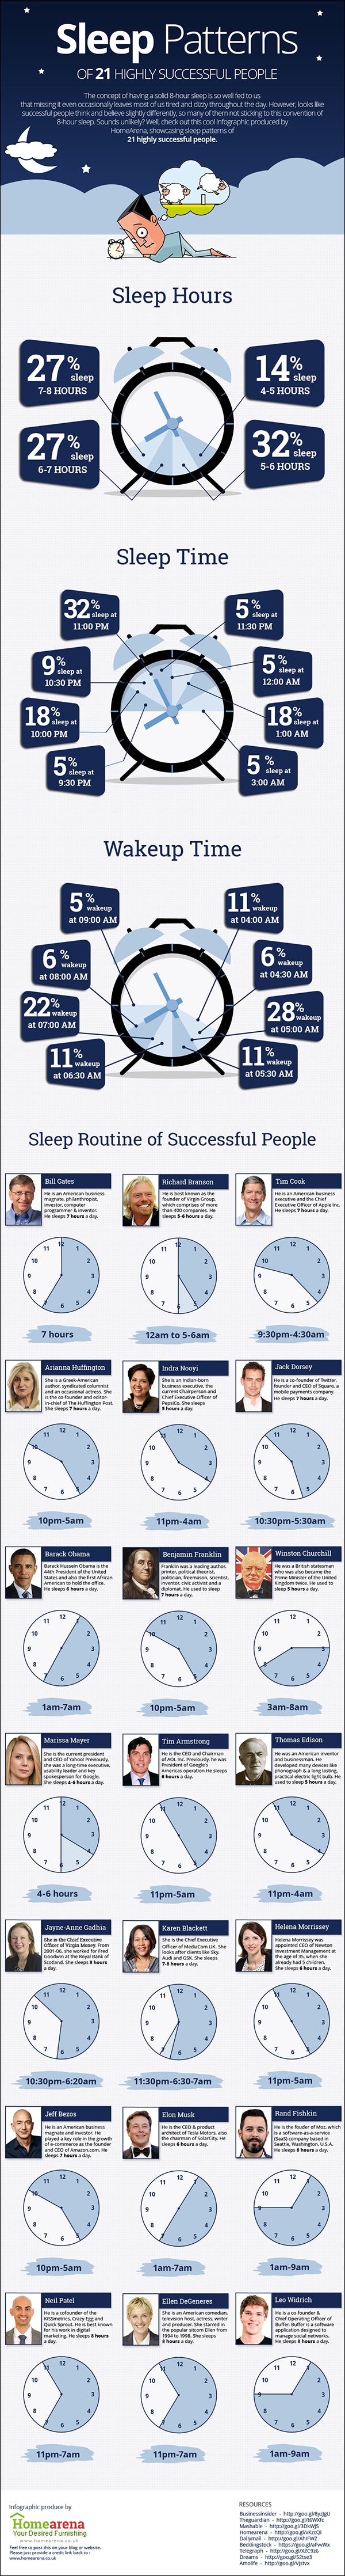 Sleep Patterns of Successful People Infographic